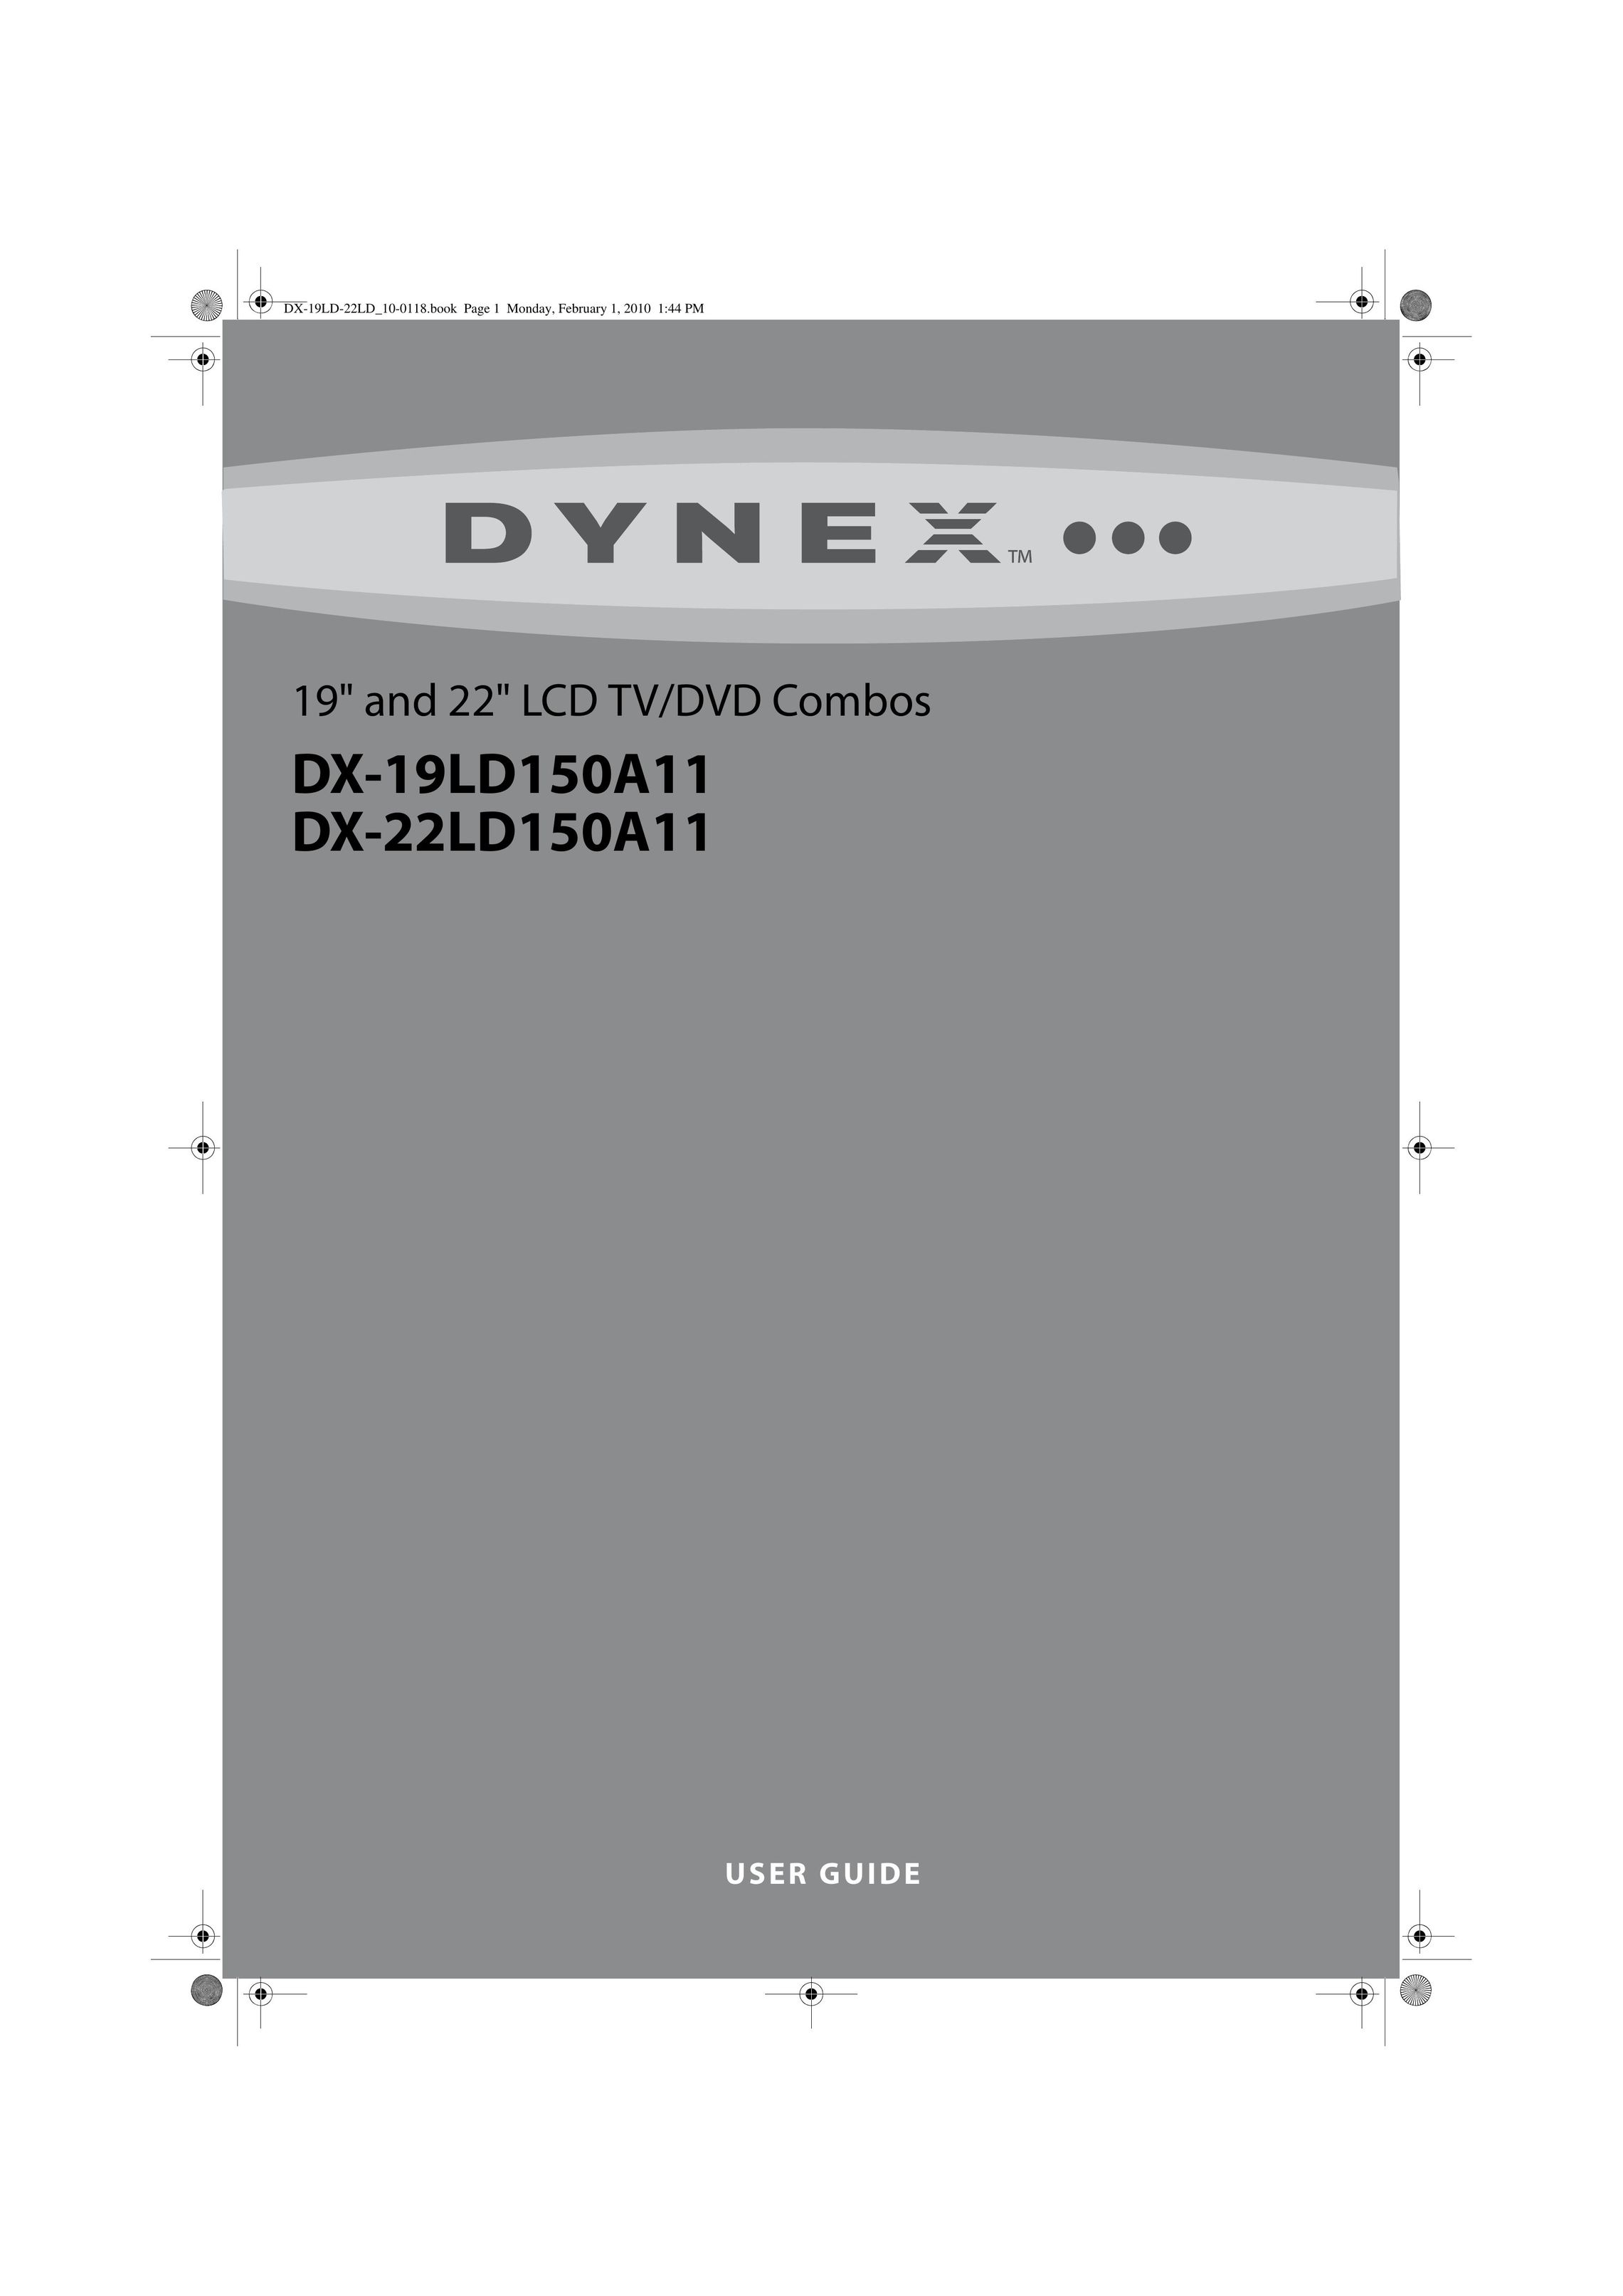 Dynex DX-19LD150A11 Flat Panel Television User Manual (Page 1)